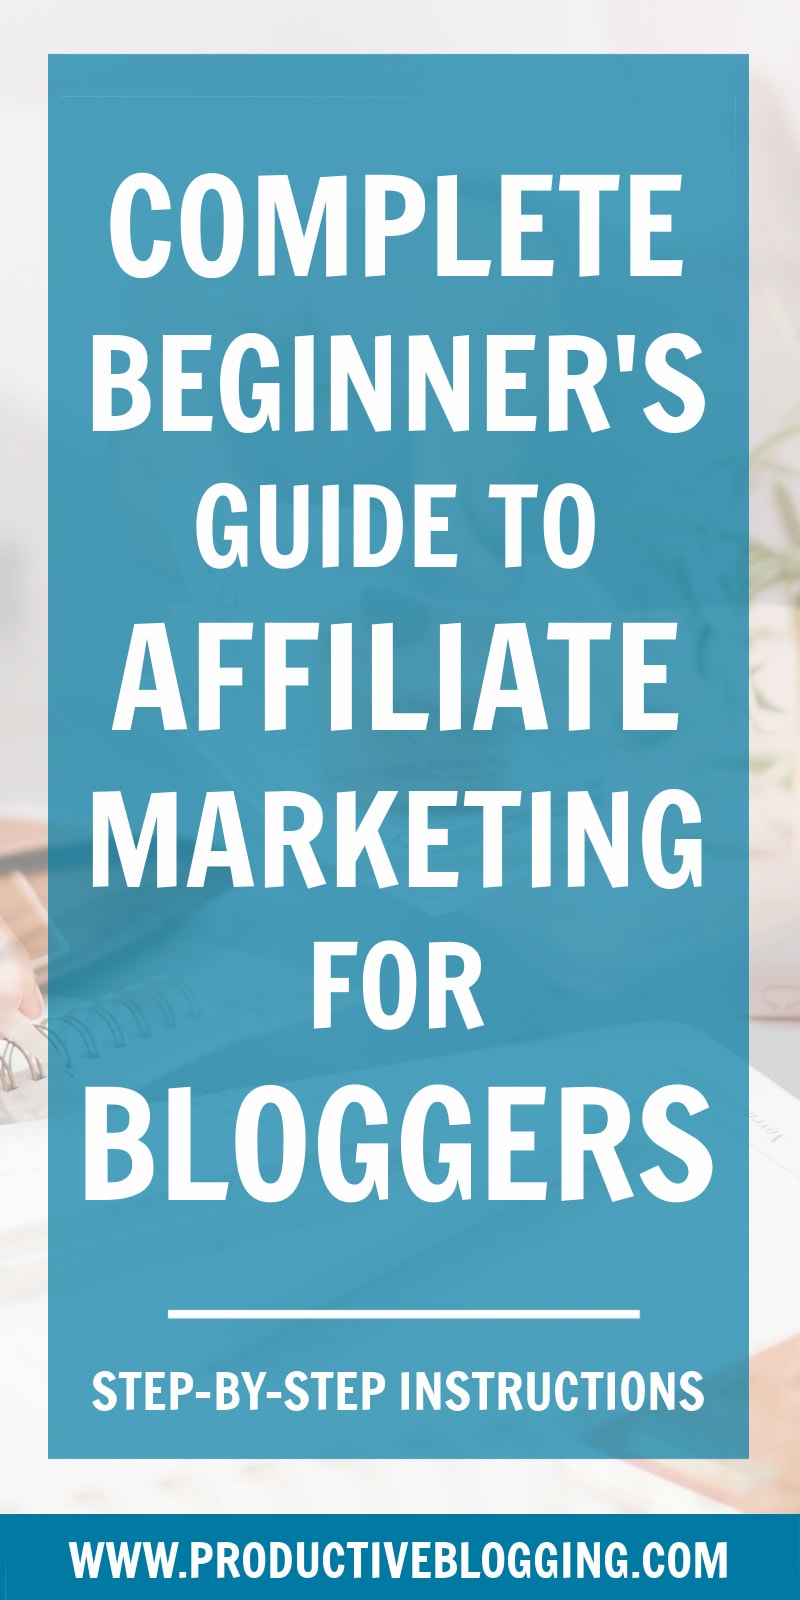 Affiliate marketing is a great way for bloggers to earn money. But what exactly is affiliate marketing? And how do you actually DO it? Find out in this beginner’s guide to affiliate marketing for bloggers. #affiliatemarketing #affiliatelinks #affiliateprogram #makemoneyblogging #monetizeyourblog #passiveincome #passiveincomeblogging #blogginglife #professionalblogger #bloggingismyjob #solopreneur #mompreneur #fempreneur #bloggingbiz #bloggingtips #blogsmarternotharder #productiveblogging